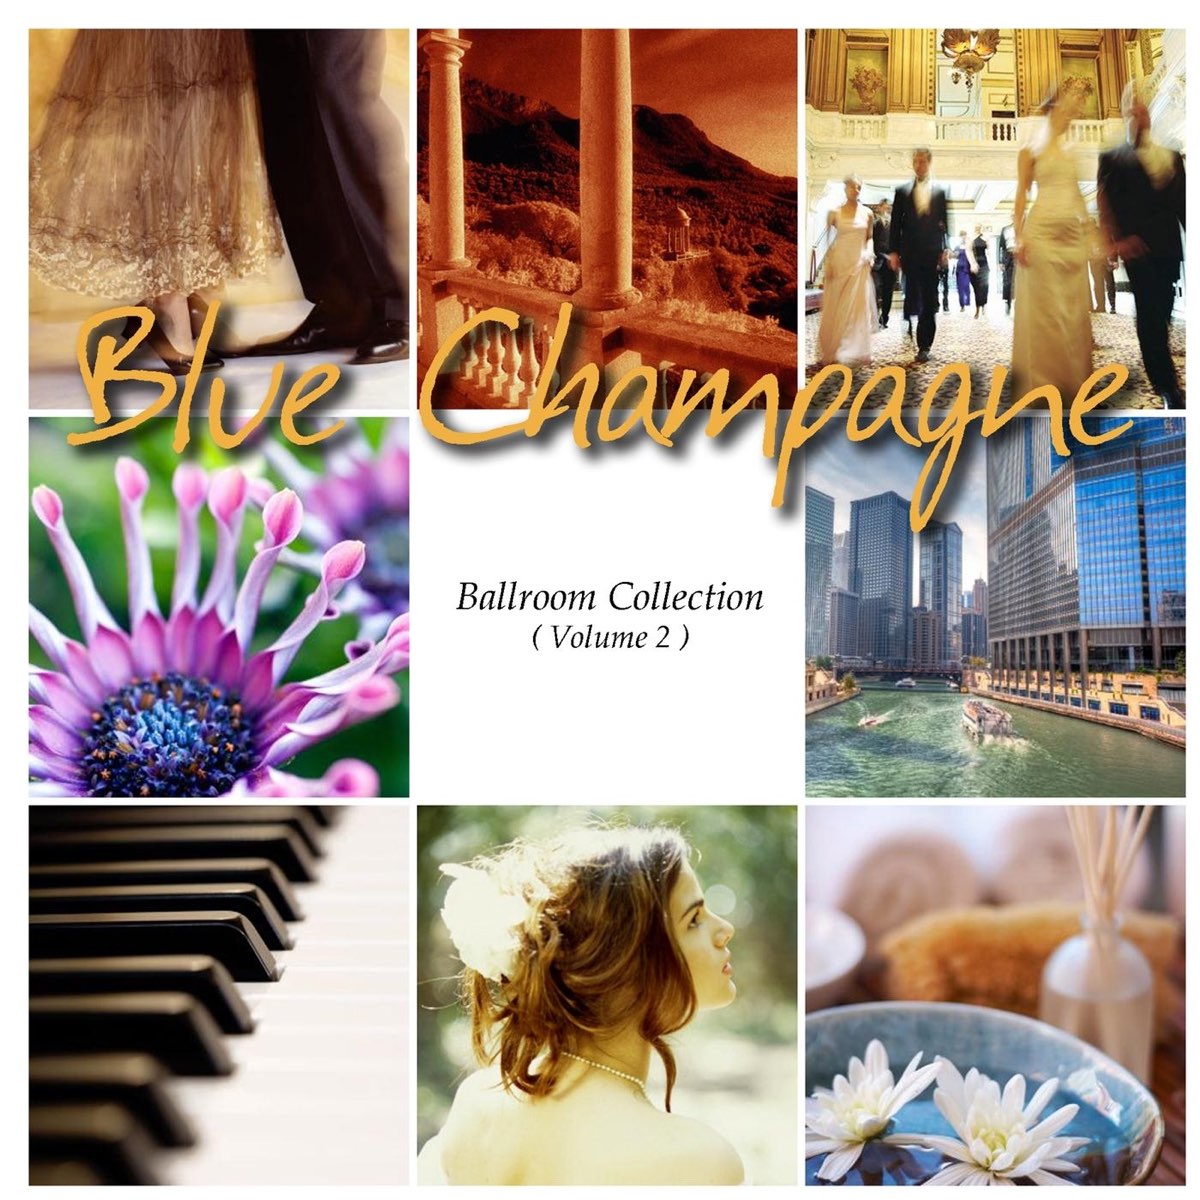 ‎Ballroom Collection, Vol. 2 - Album by Blue Champagne - Apple Music